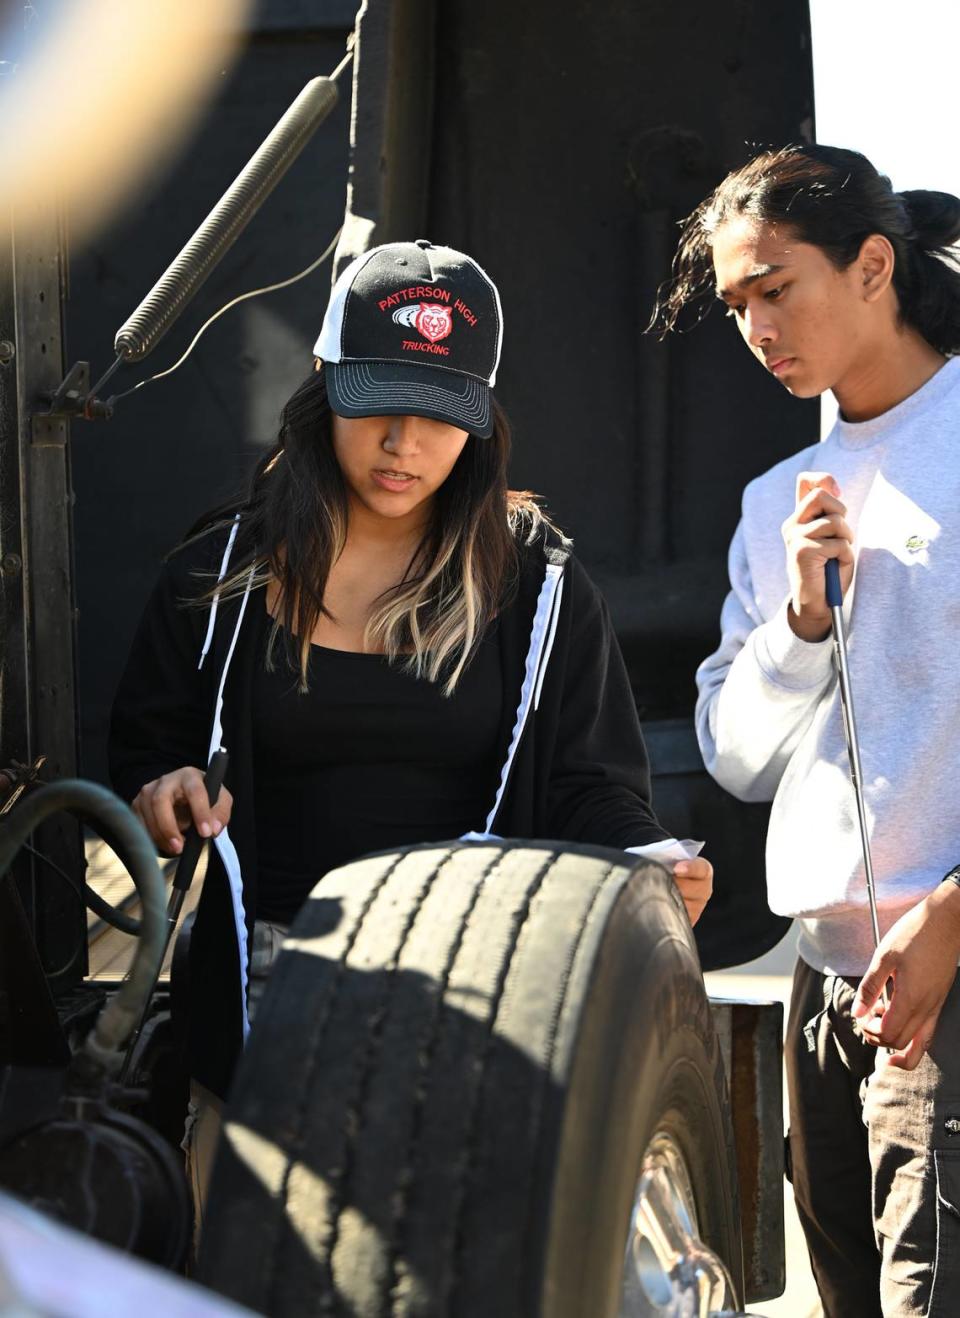 Students Teffany Dominguez Santamaria, left, and Melvino Roxas conduct a pre-trip inspection during trucking class at Patterson High School in Patterson, Calif., Friday, Oct. 27, 2023. The school has career technical education class to teach trucking and help students gain a commercial drivers permit.